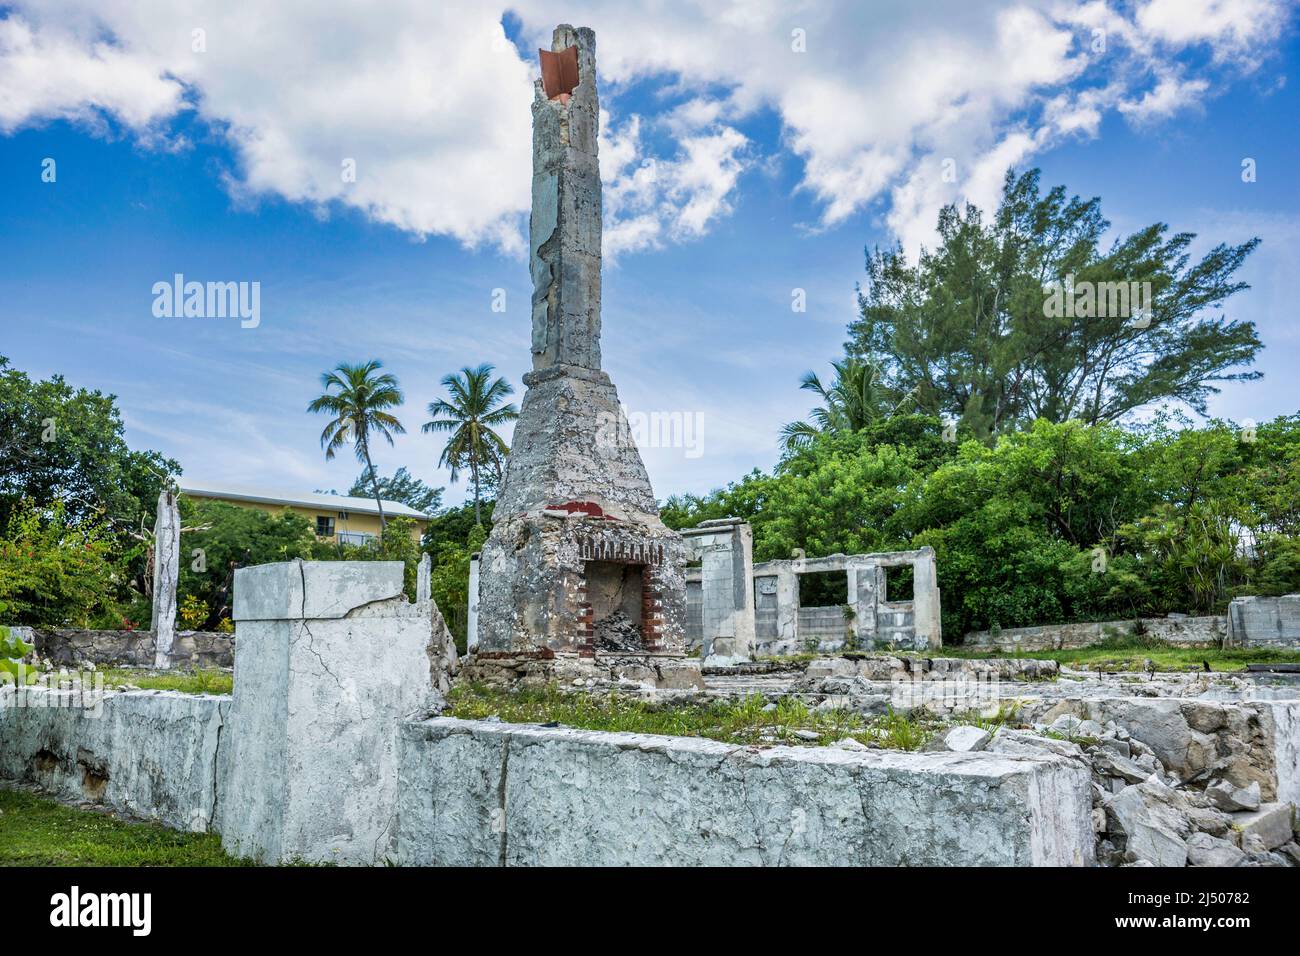 The ruins of an old Bahamian home on the Kings Highway in Bimini, the Bahamas. Stock Photo